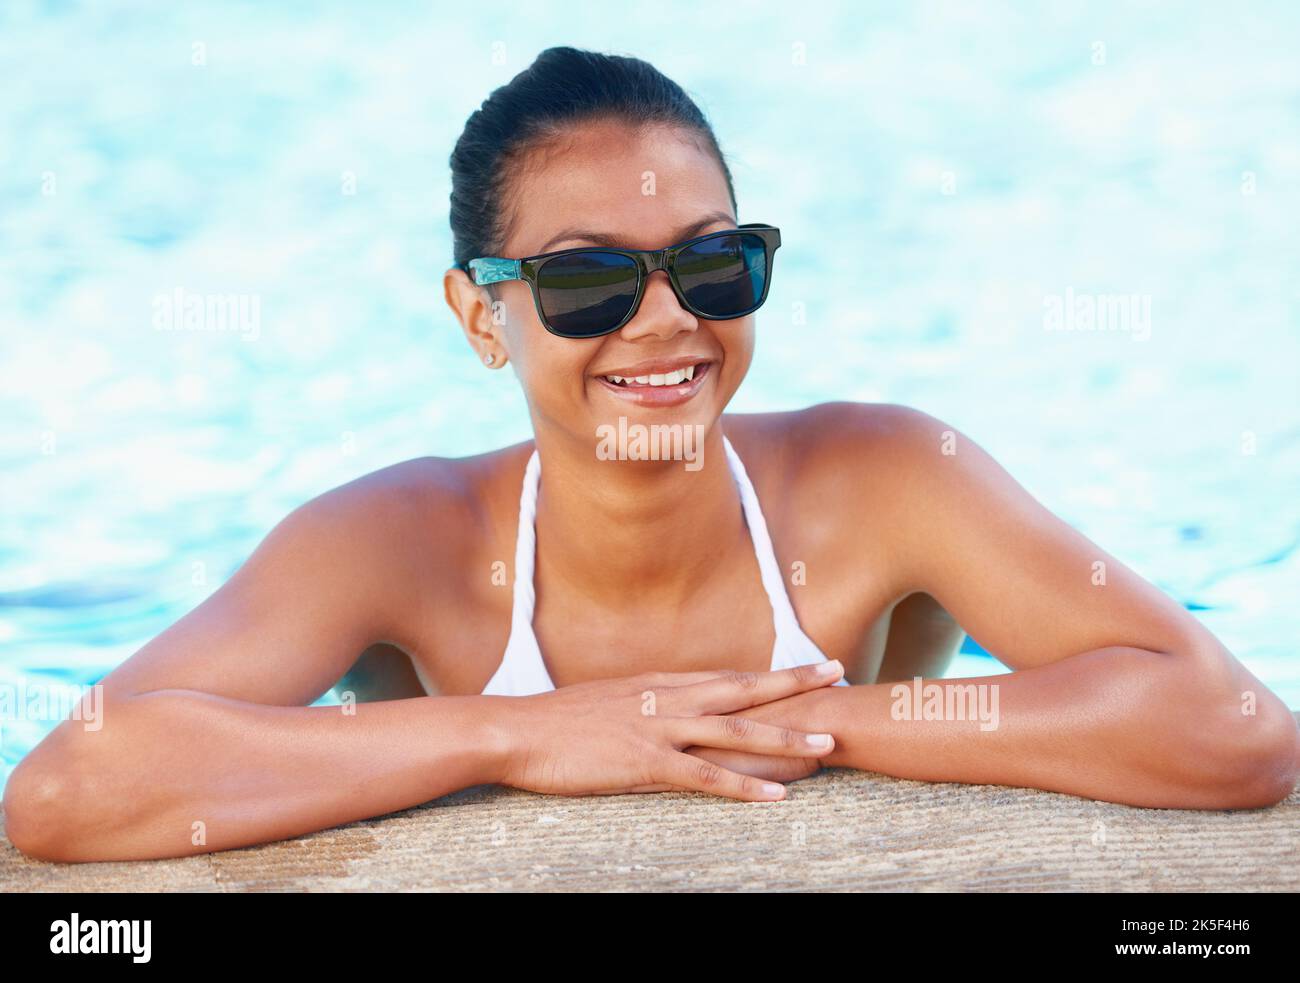 Looking good this summer. Cropped view of a young woman in a swimming pool smiling while wearing shades. Stock Photo